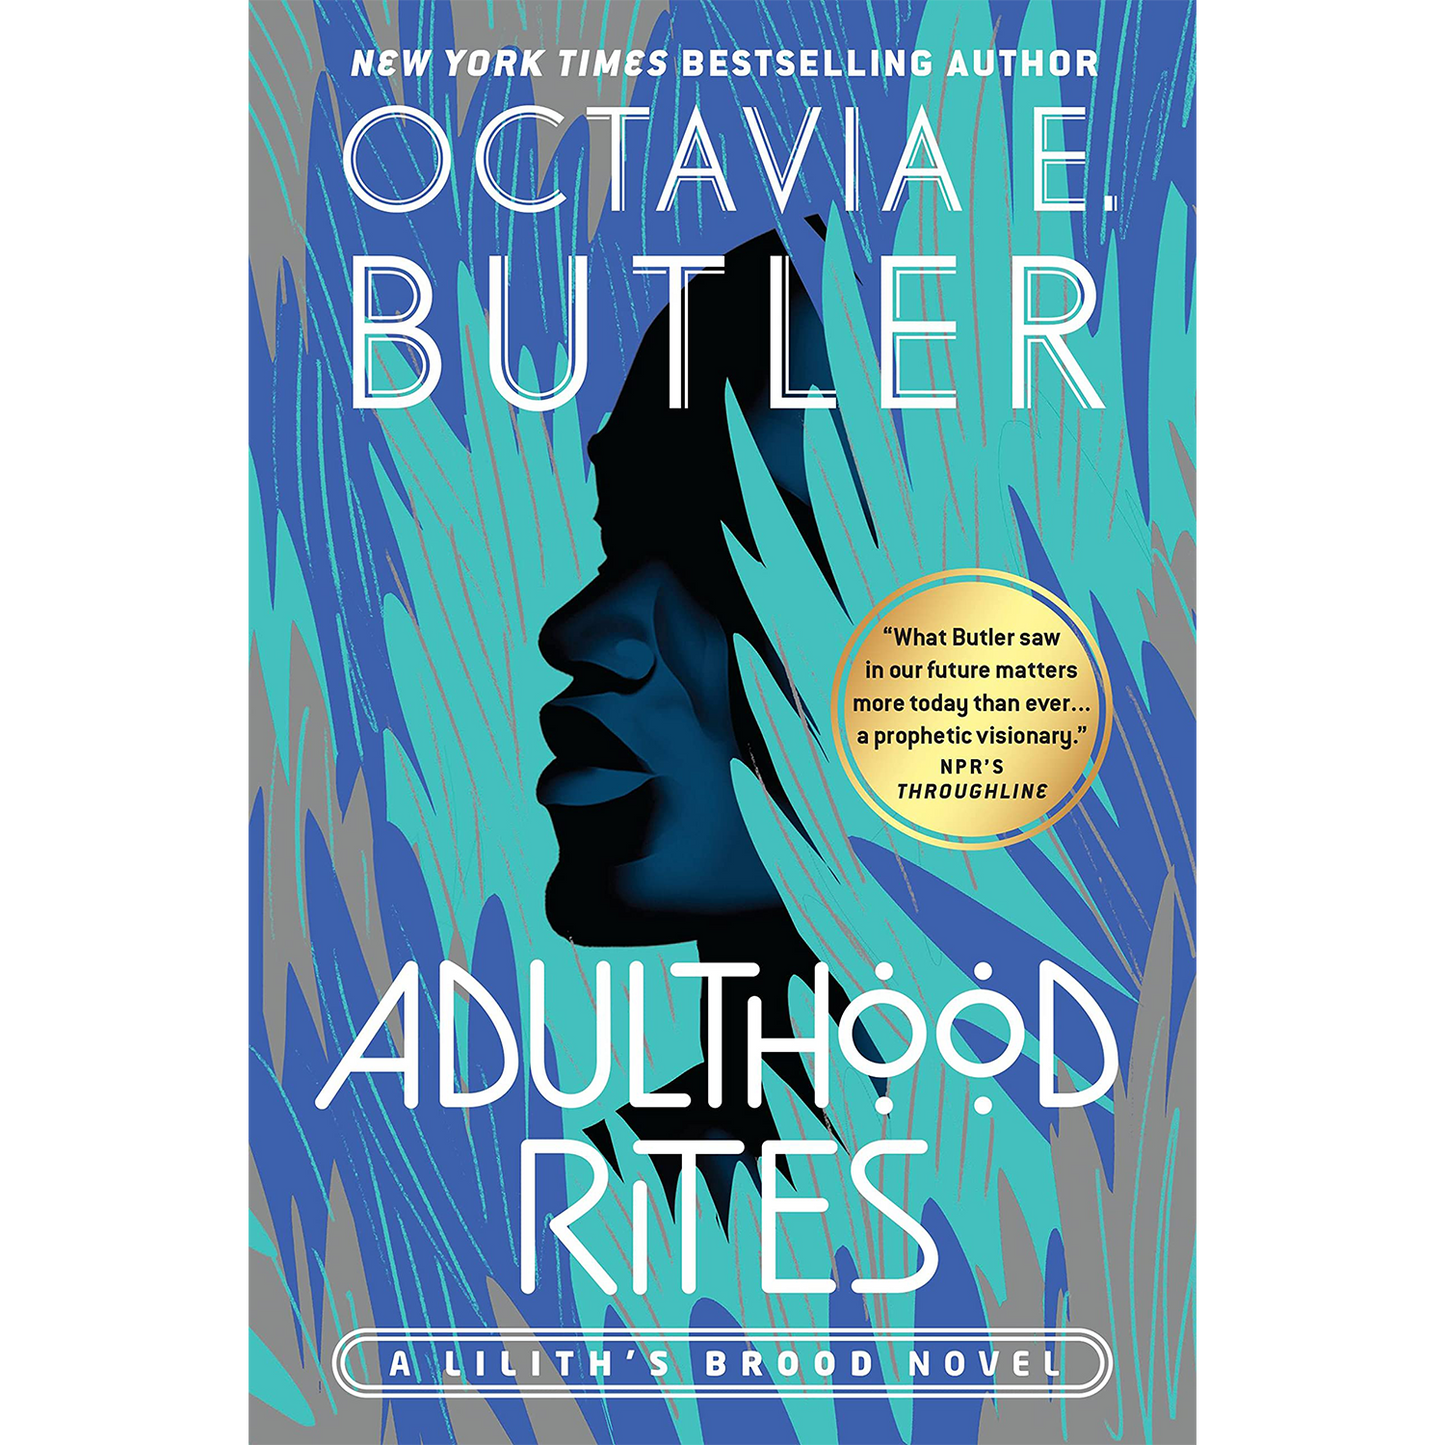 Adulthood Rites by Octavia Butler (Lilith's Brood Series 3 Books - 2nd book)